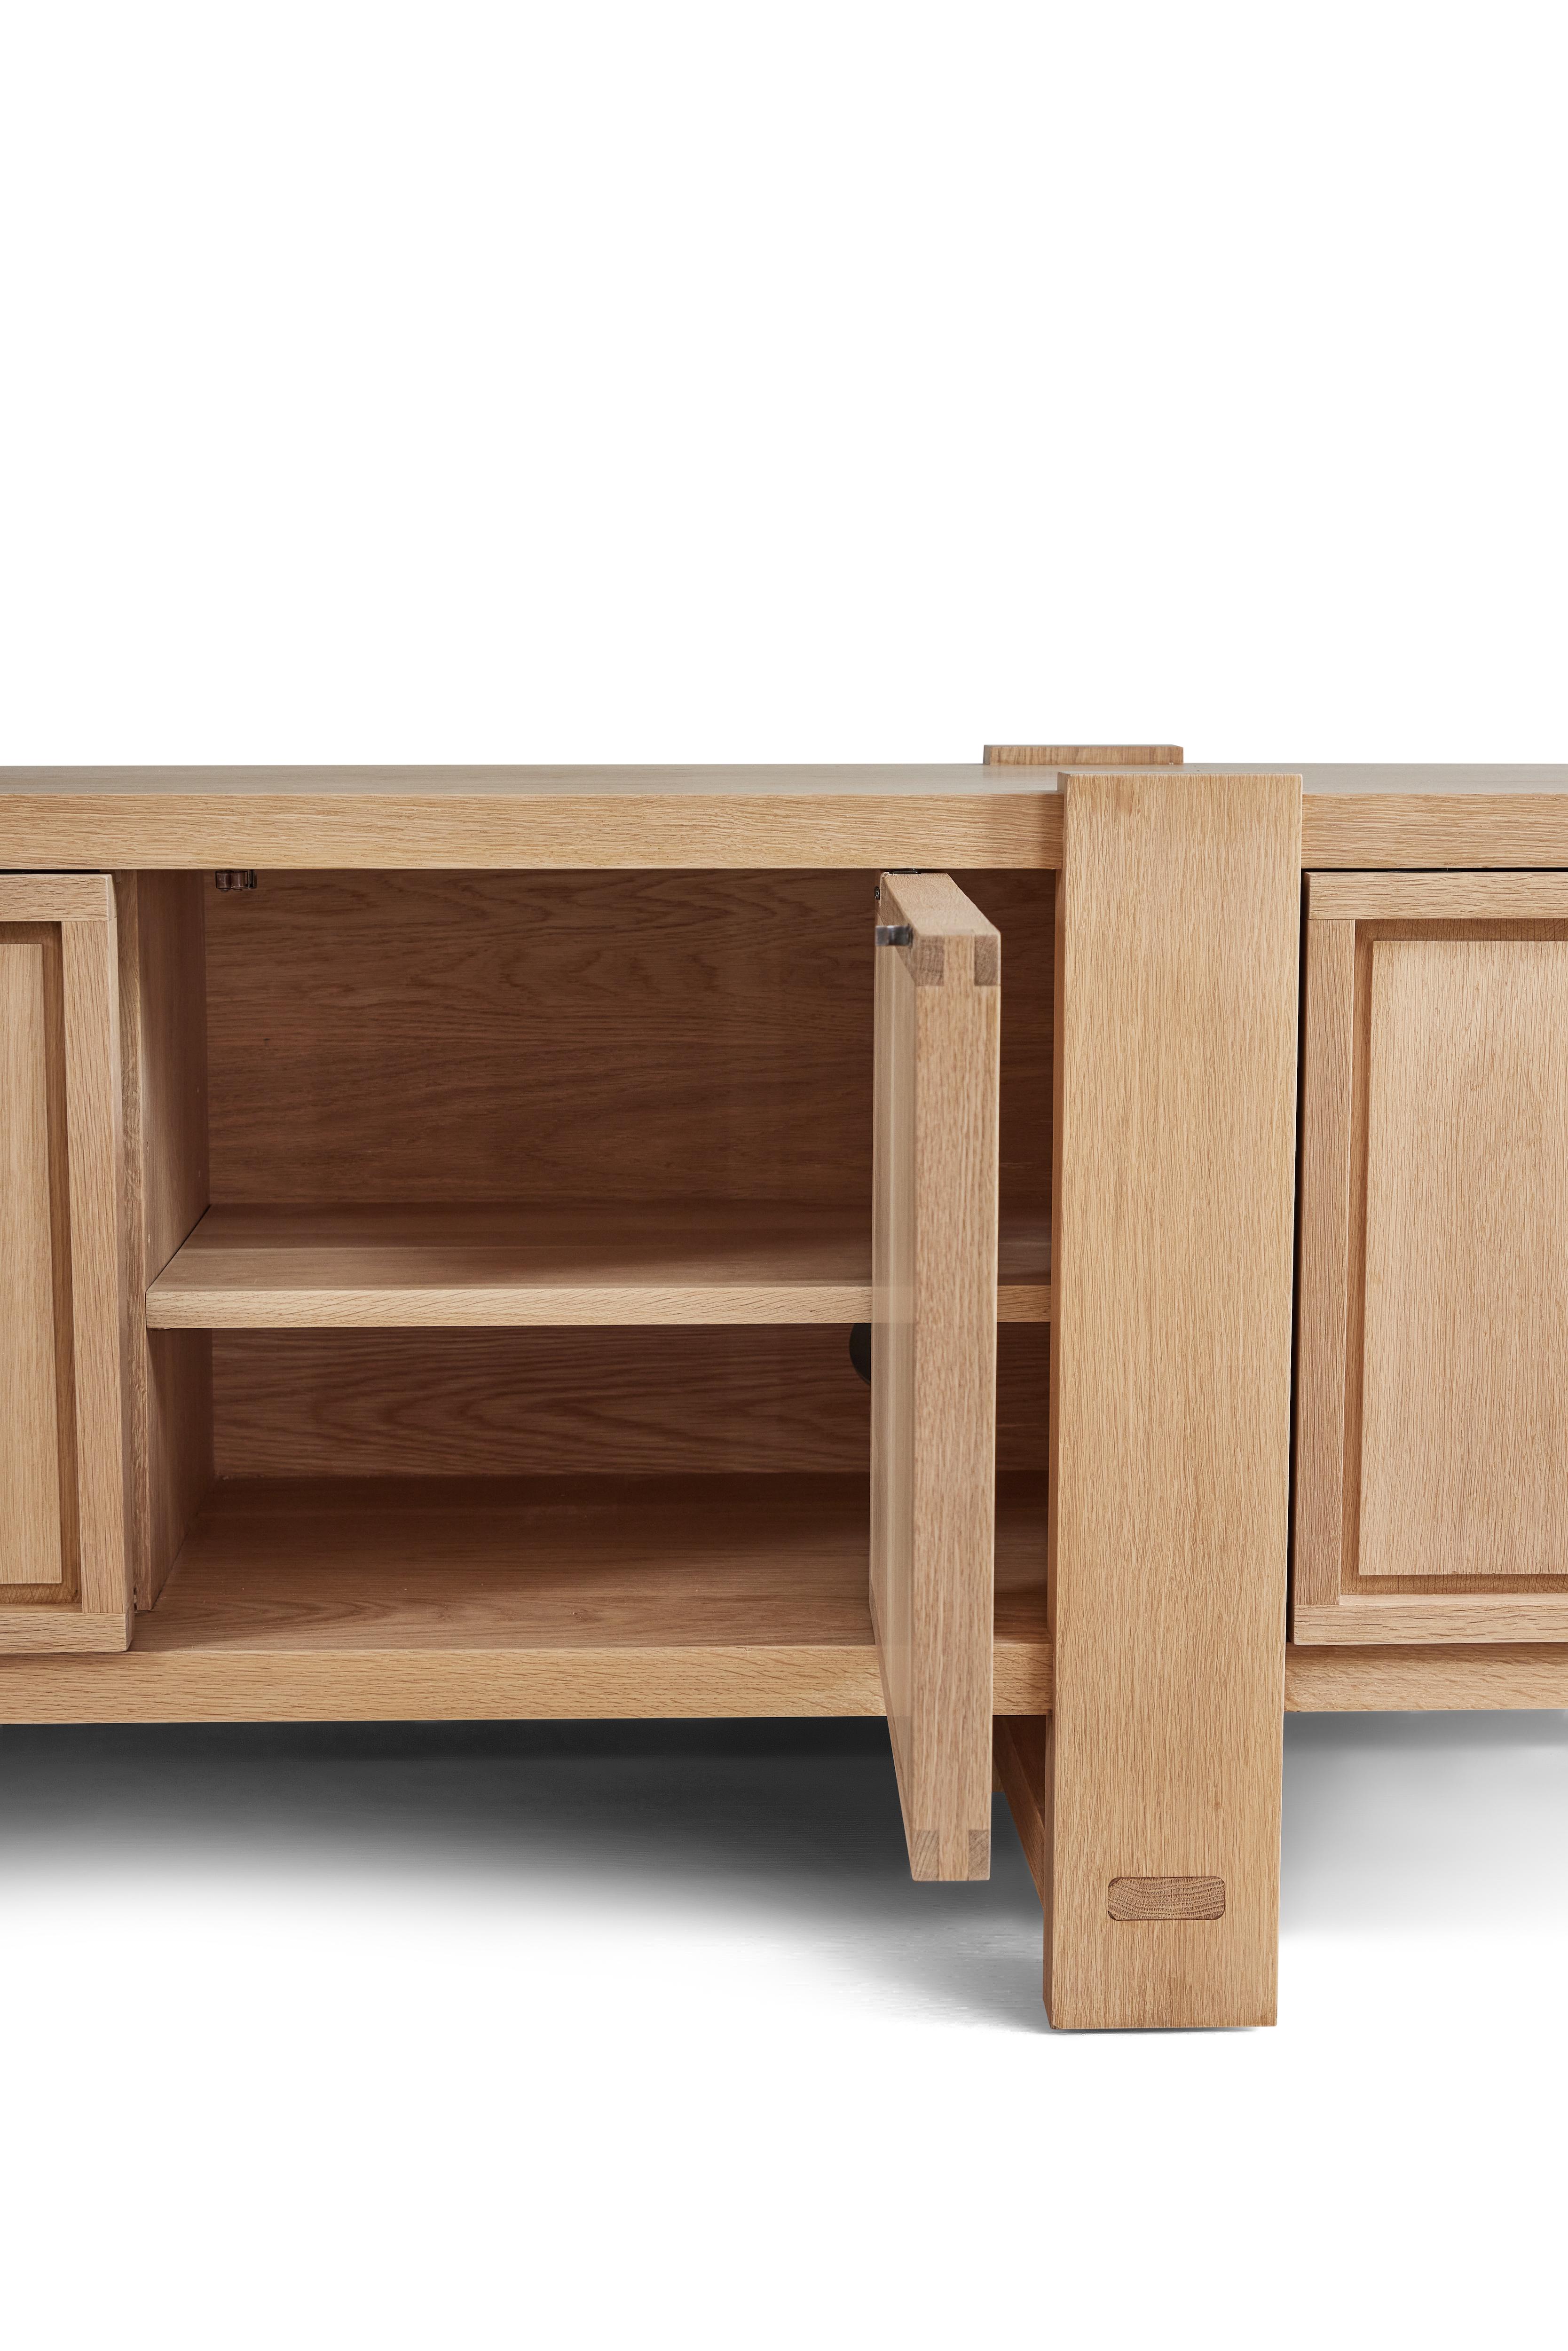 Contemporary Lake Credenza in White Oak, with Interior Drawers, by August Abode For Sale